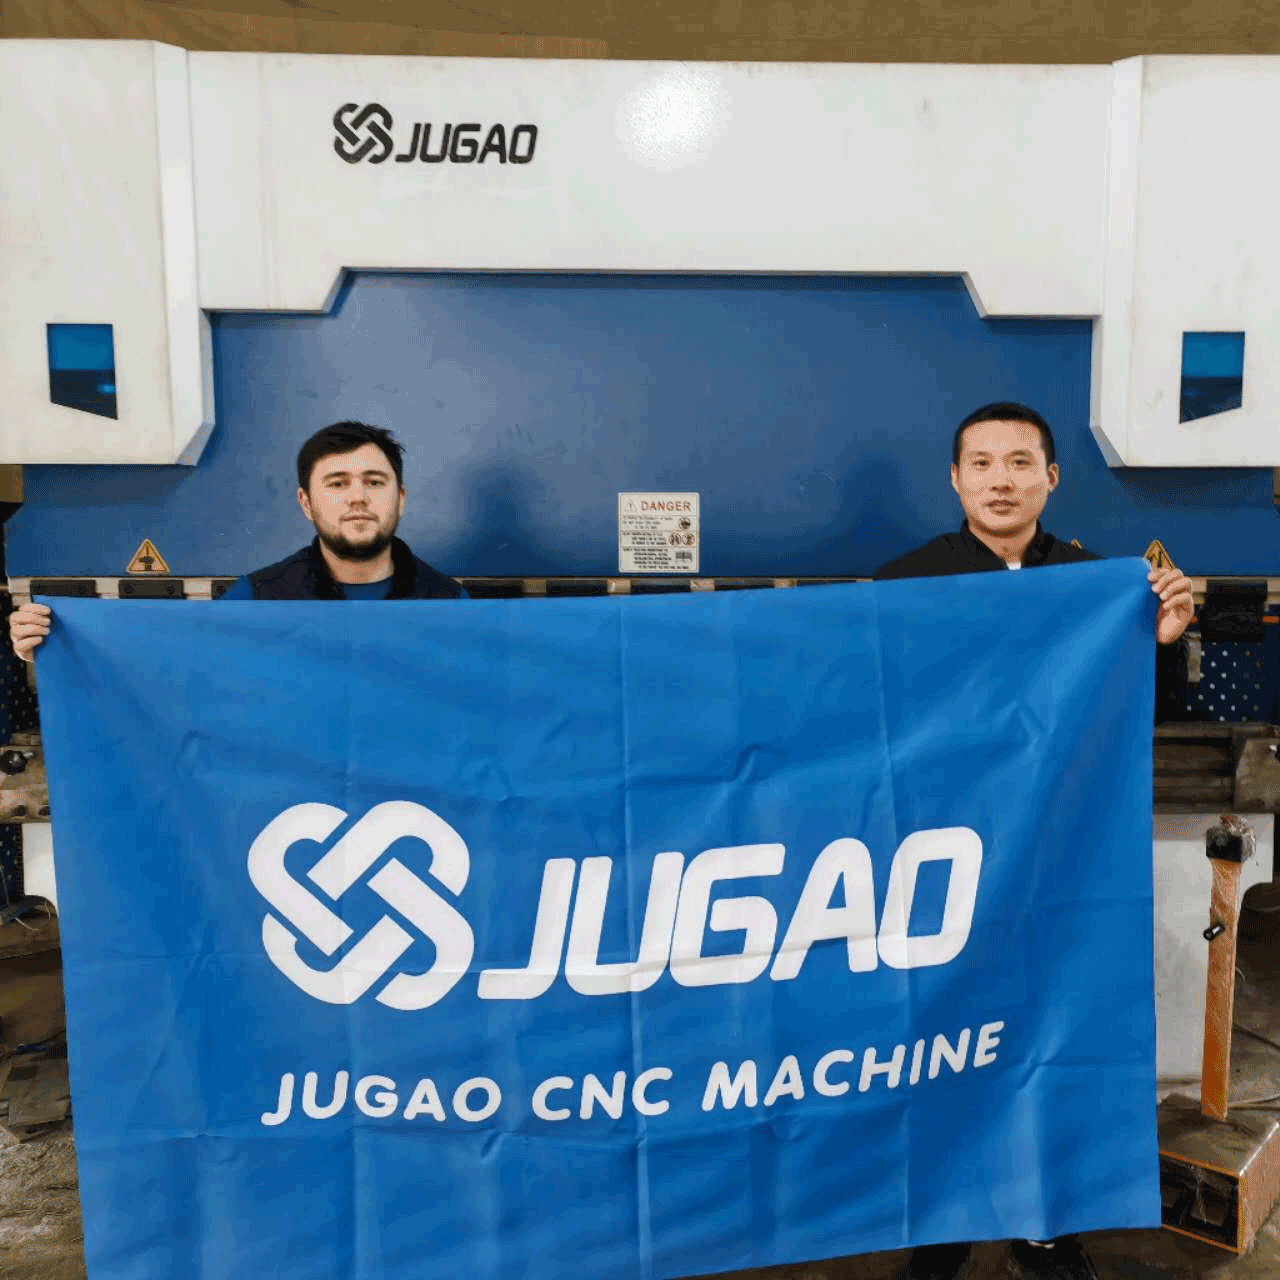 JUGAO CNC MACHINE CNC bending machine is exported to Uzbekistan, and its after-sales service is well received